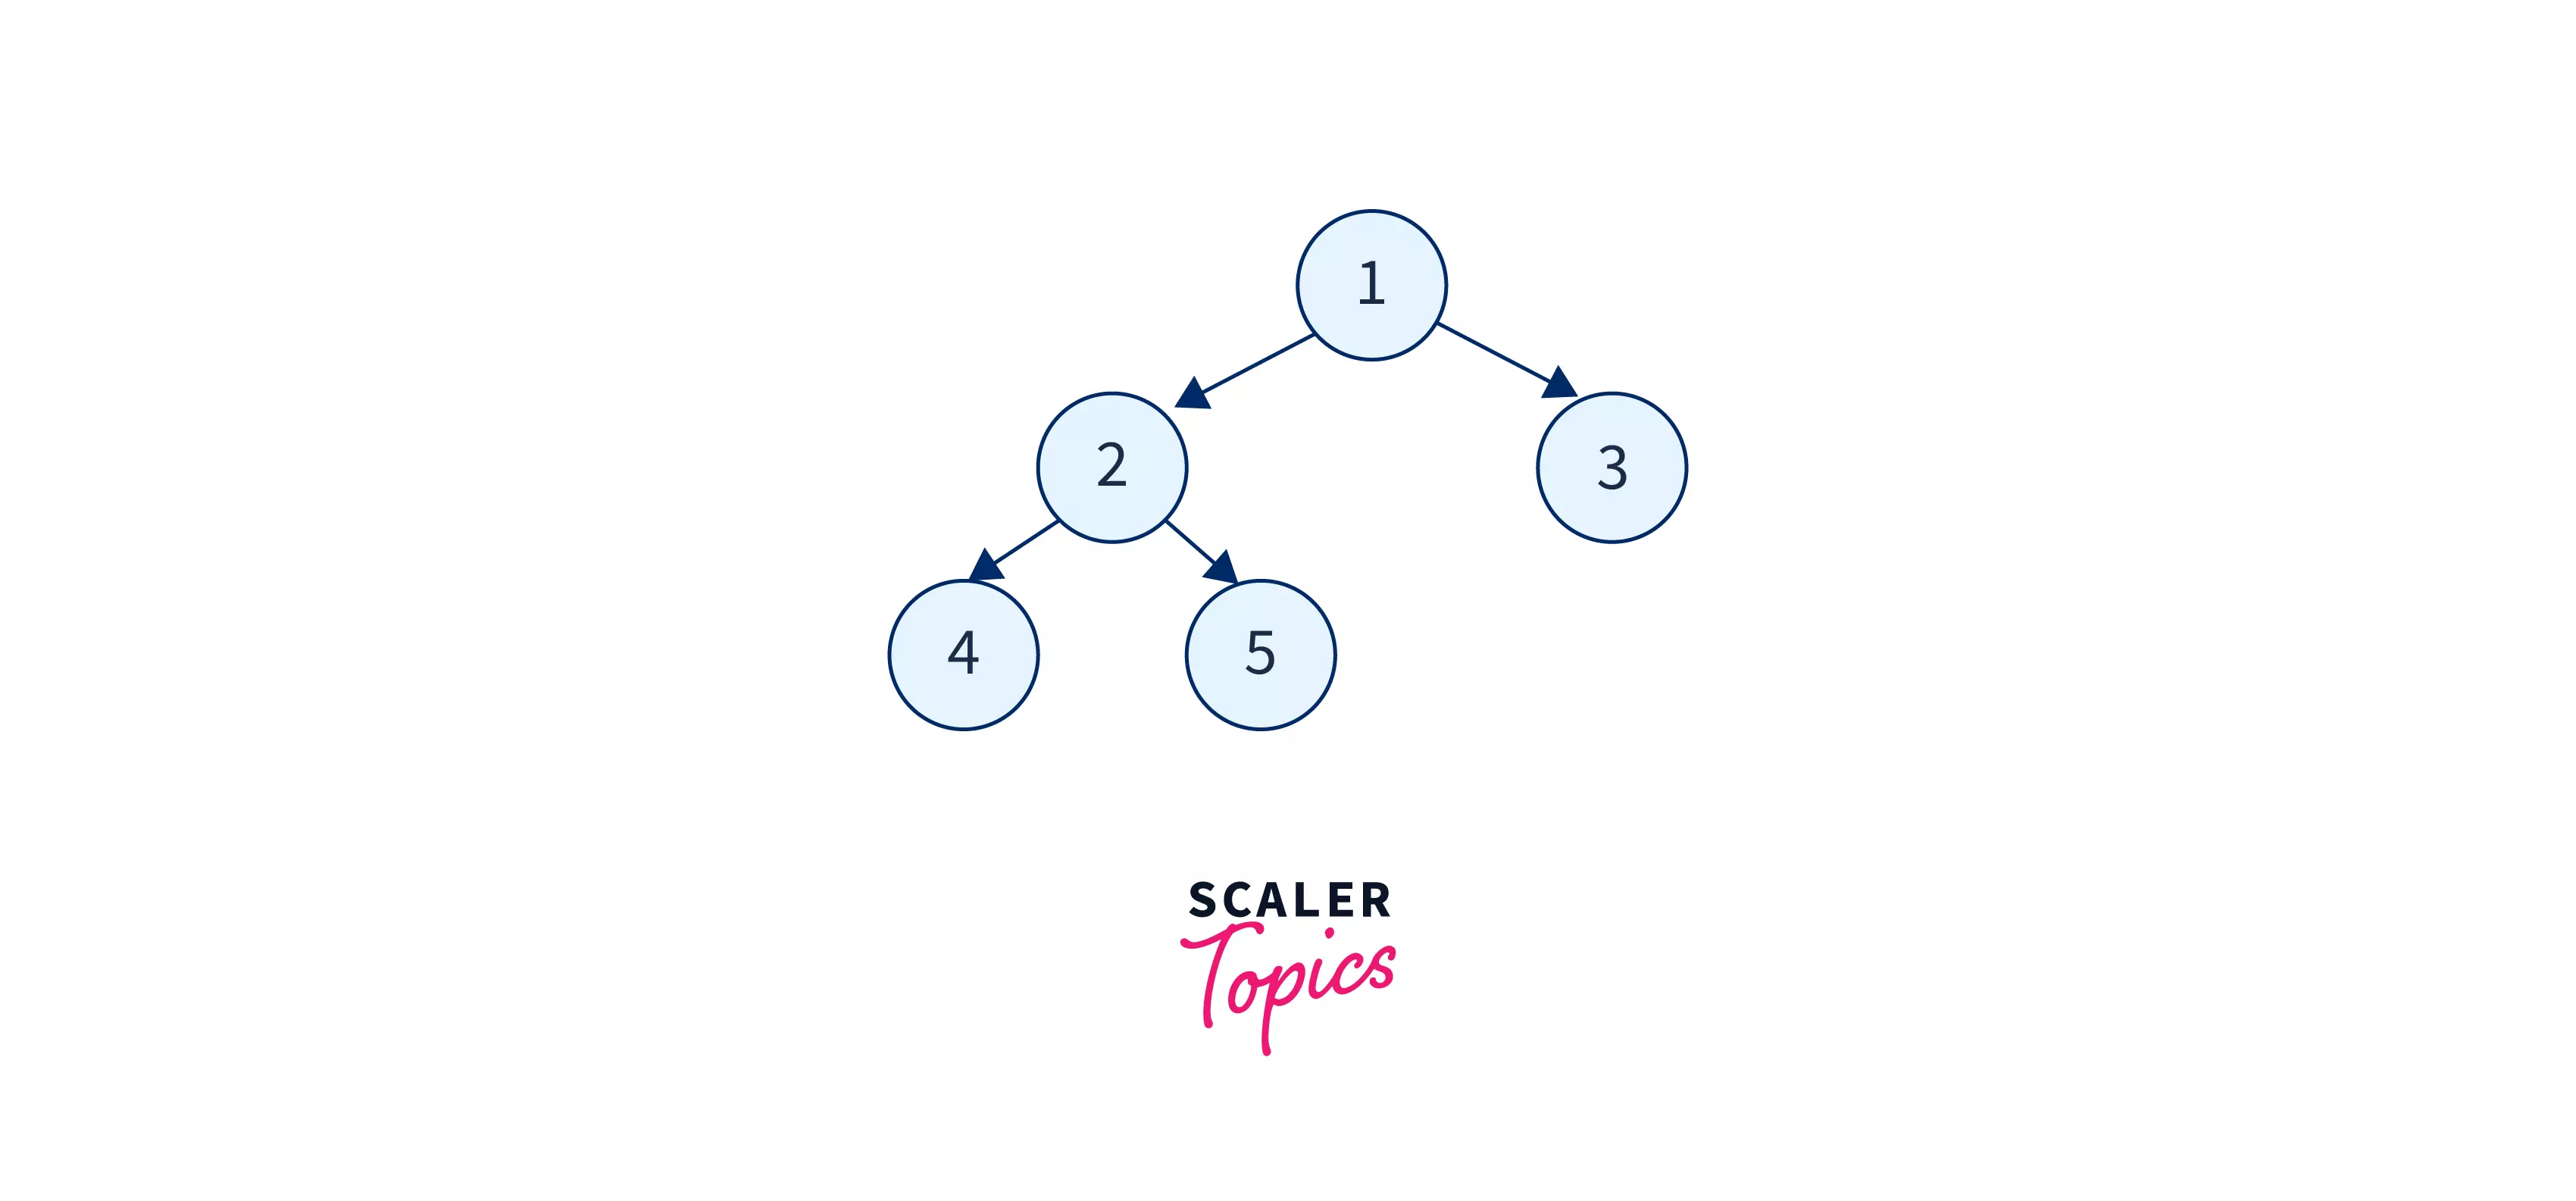 What is Traversing in Data Structure? - Scaler Topics